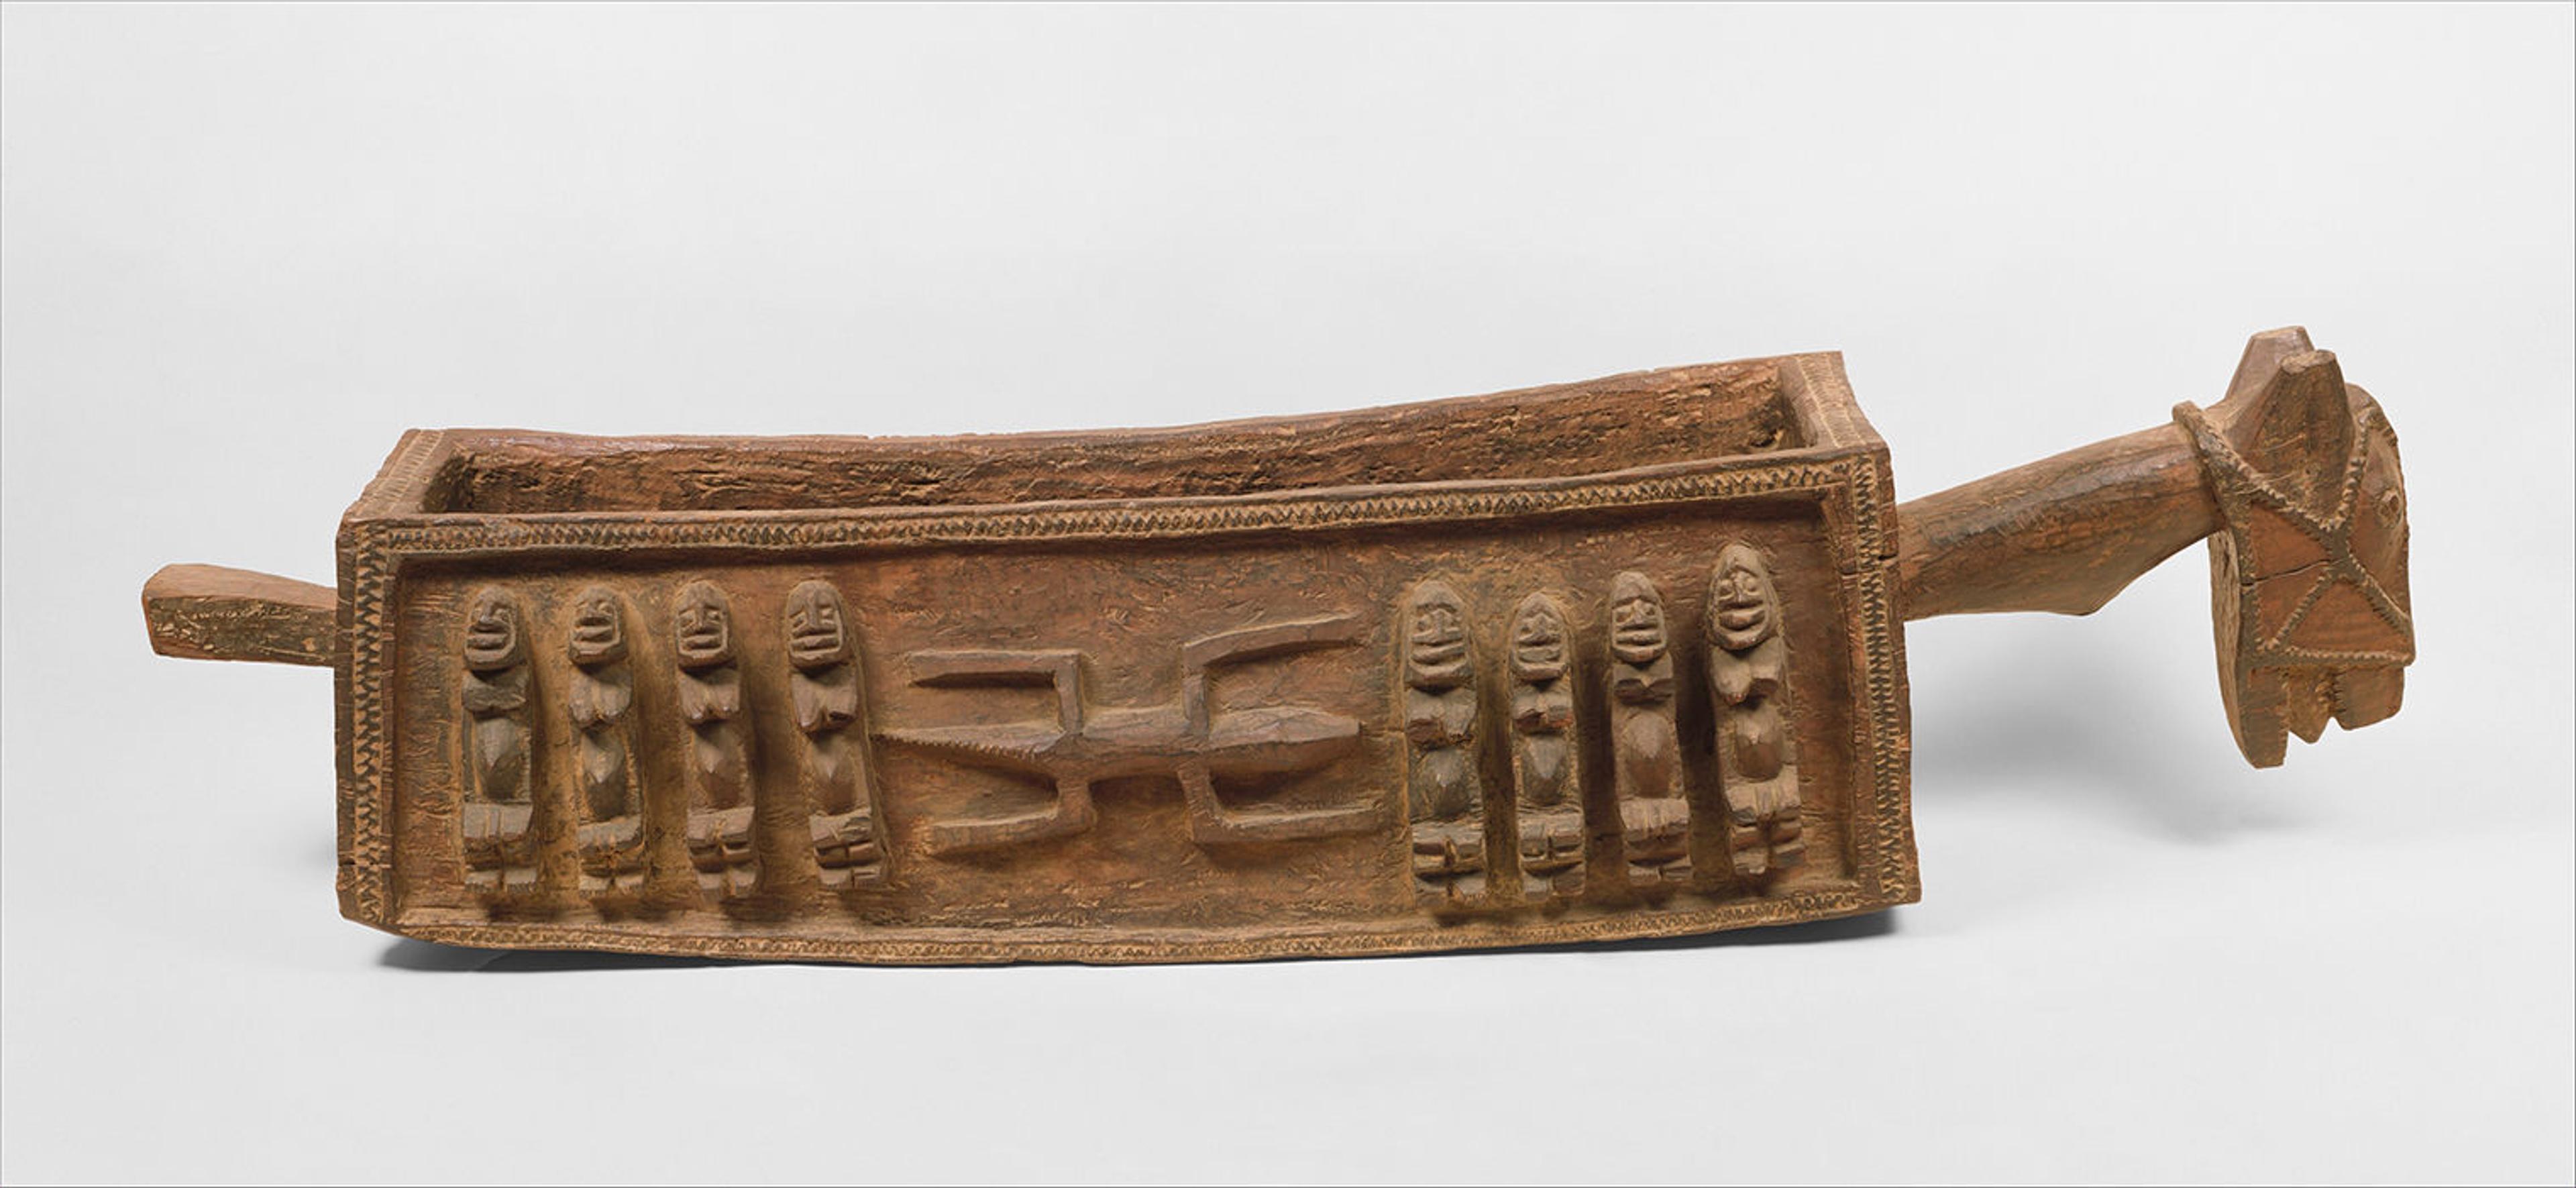 Picture of a ritual vessel. It's hollow on the inside, made of wood, and has figures and designs carved into its surface.